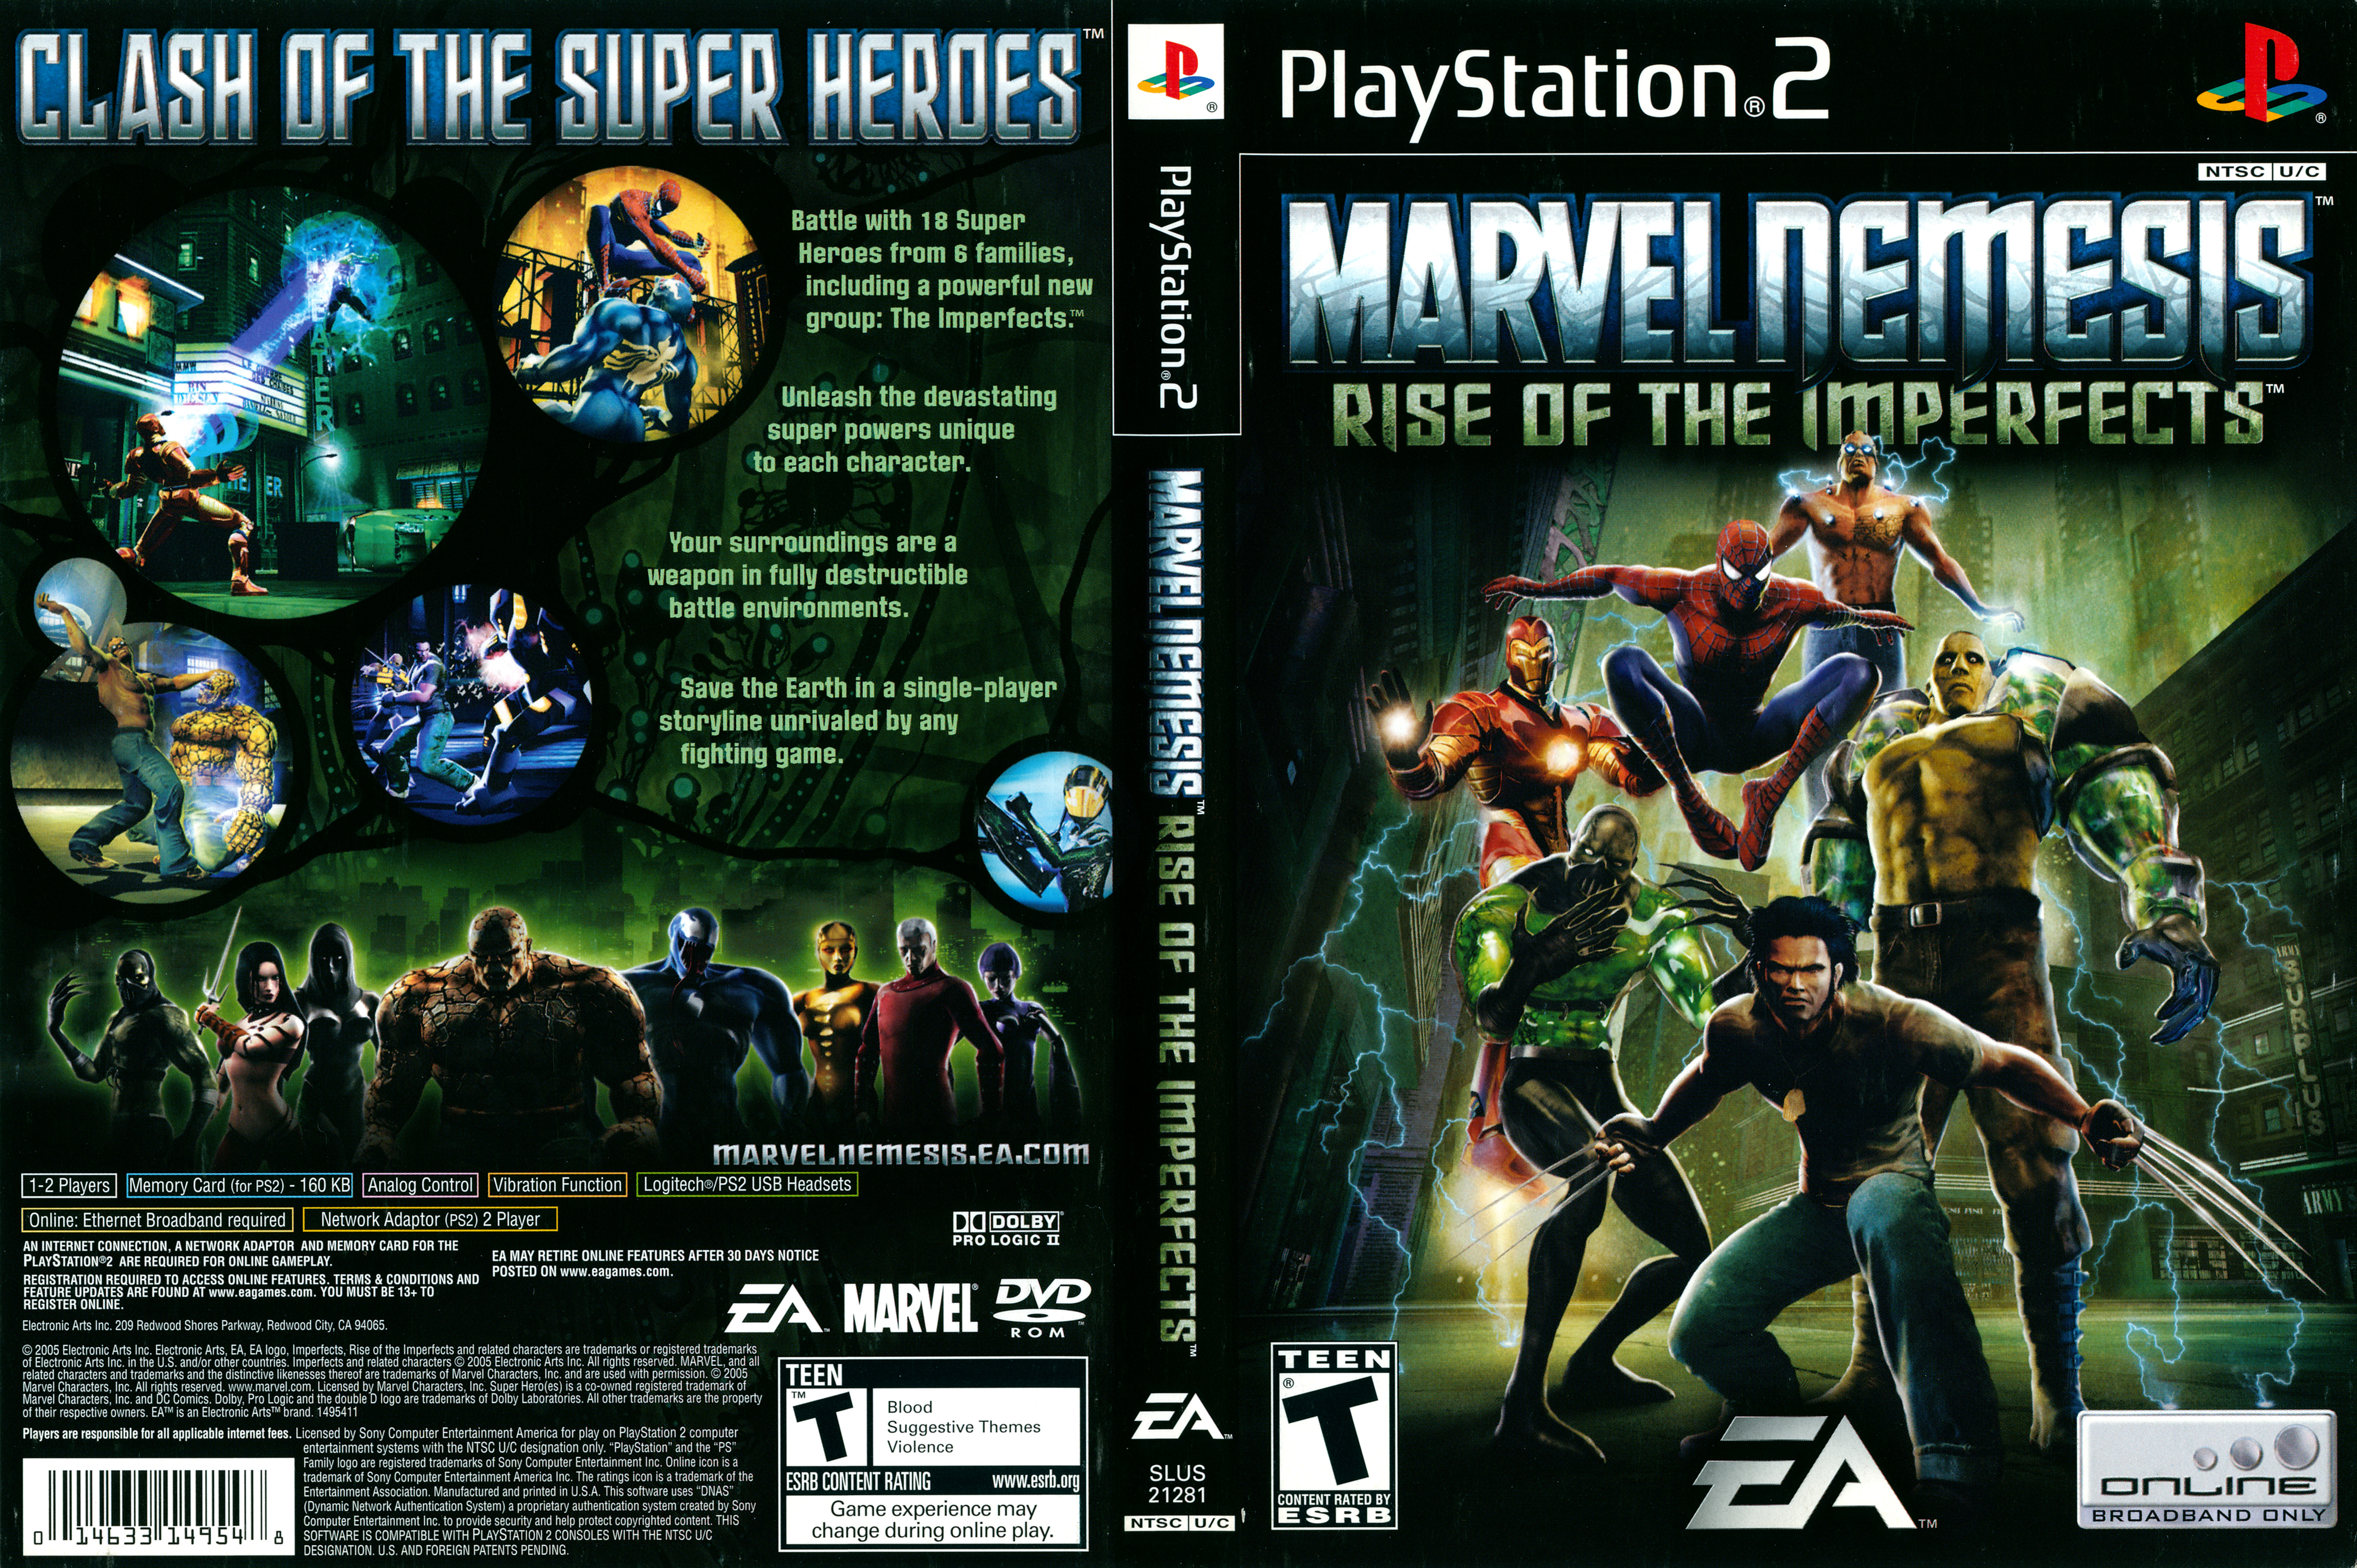 Marvel Nemesis Of The Imperfects [SLUS 21281] (Sony Playstation 2) Scans (1200DPI), Electronic Arts, Free Download, Borrow, and Streaming, Internet Archive